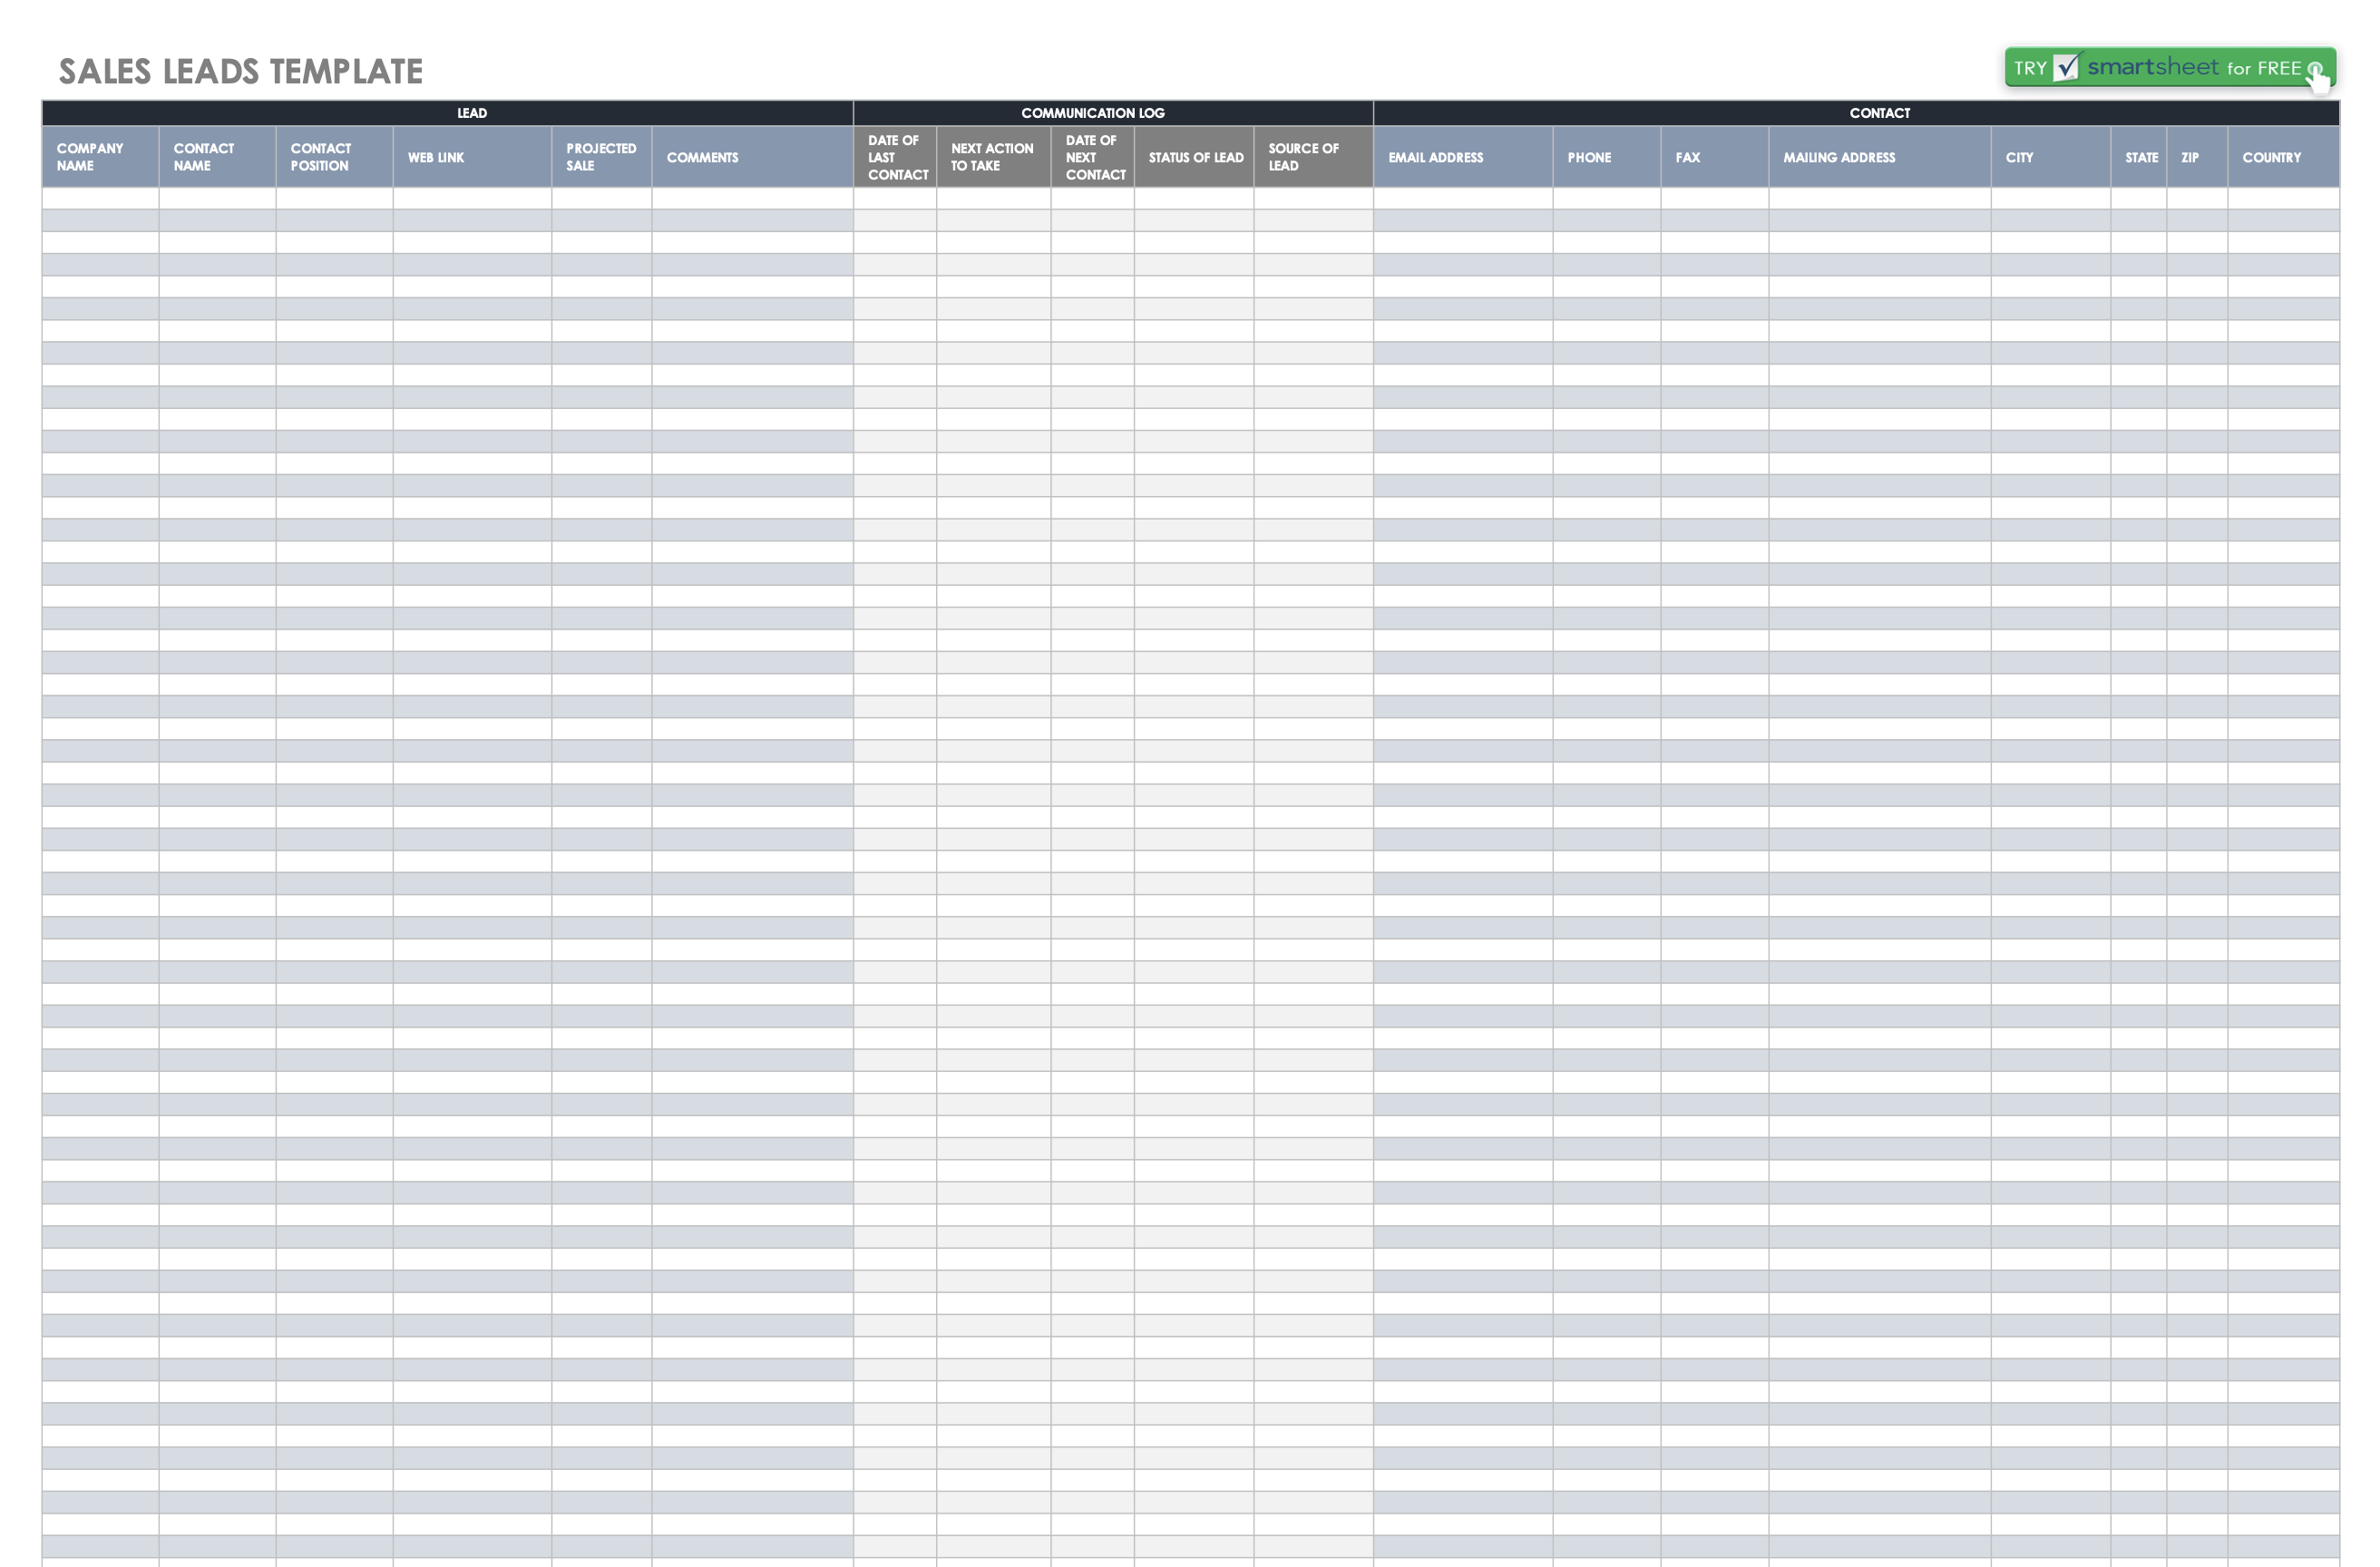 Sales Lead Tracking Spreadsheet ExcelTemplate